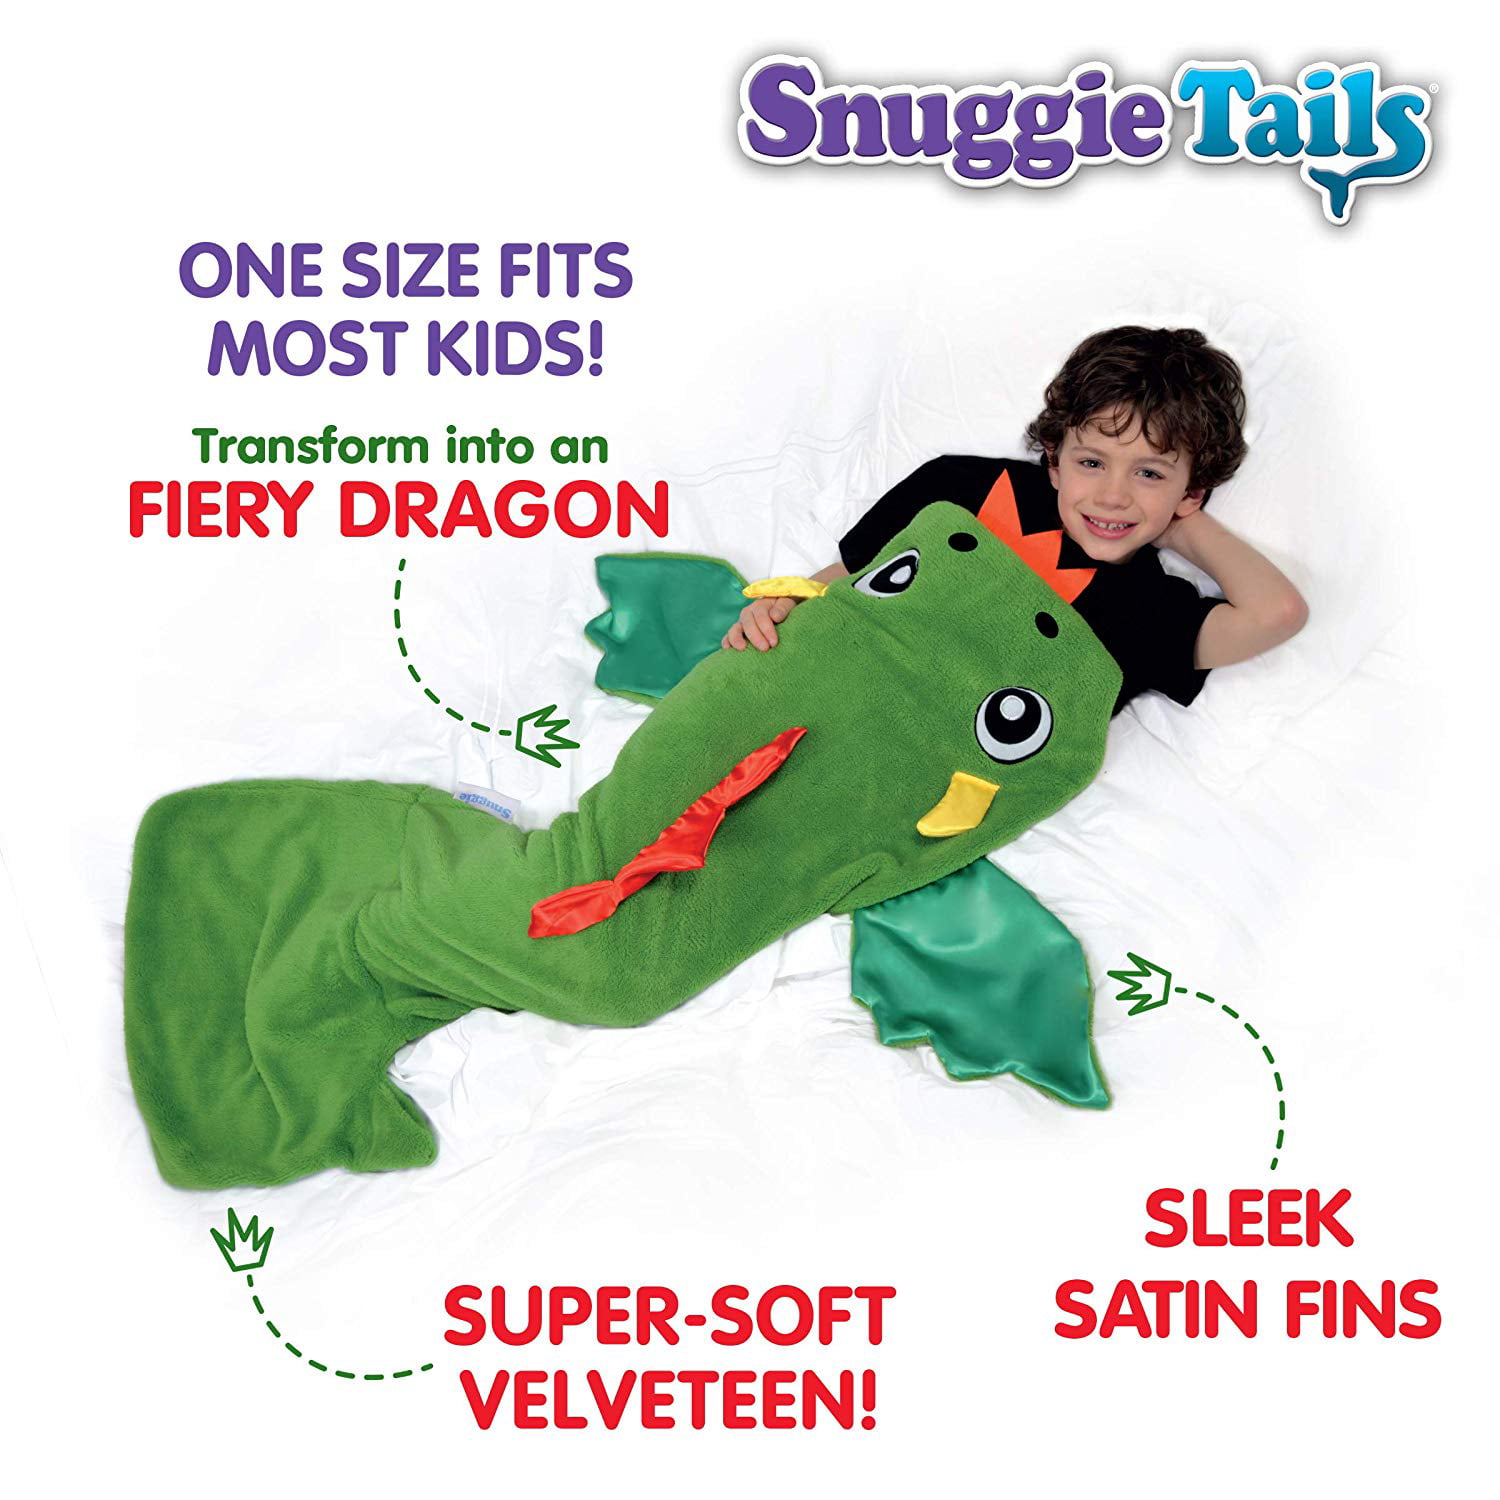 MA NEW Snuggie Tails Green Dragon Soft Cuddly Blanket Unopened 